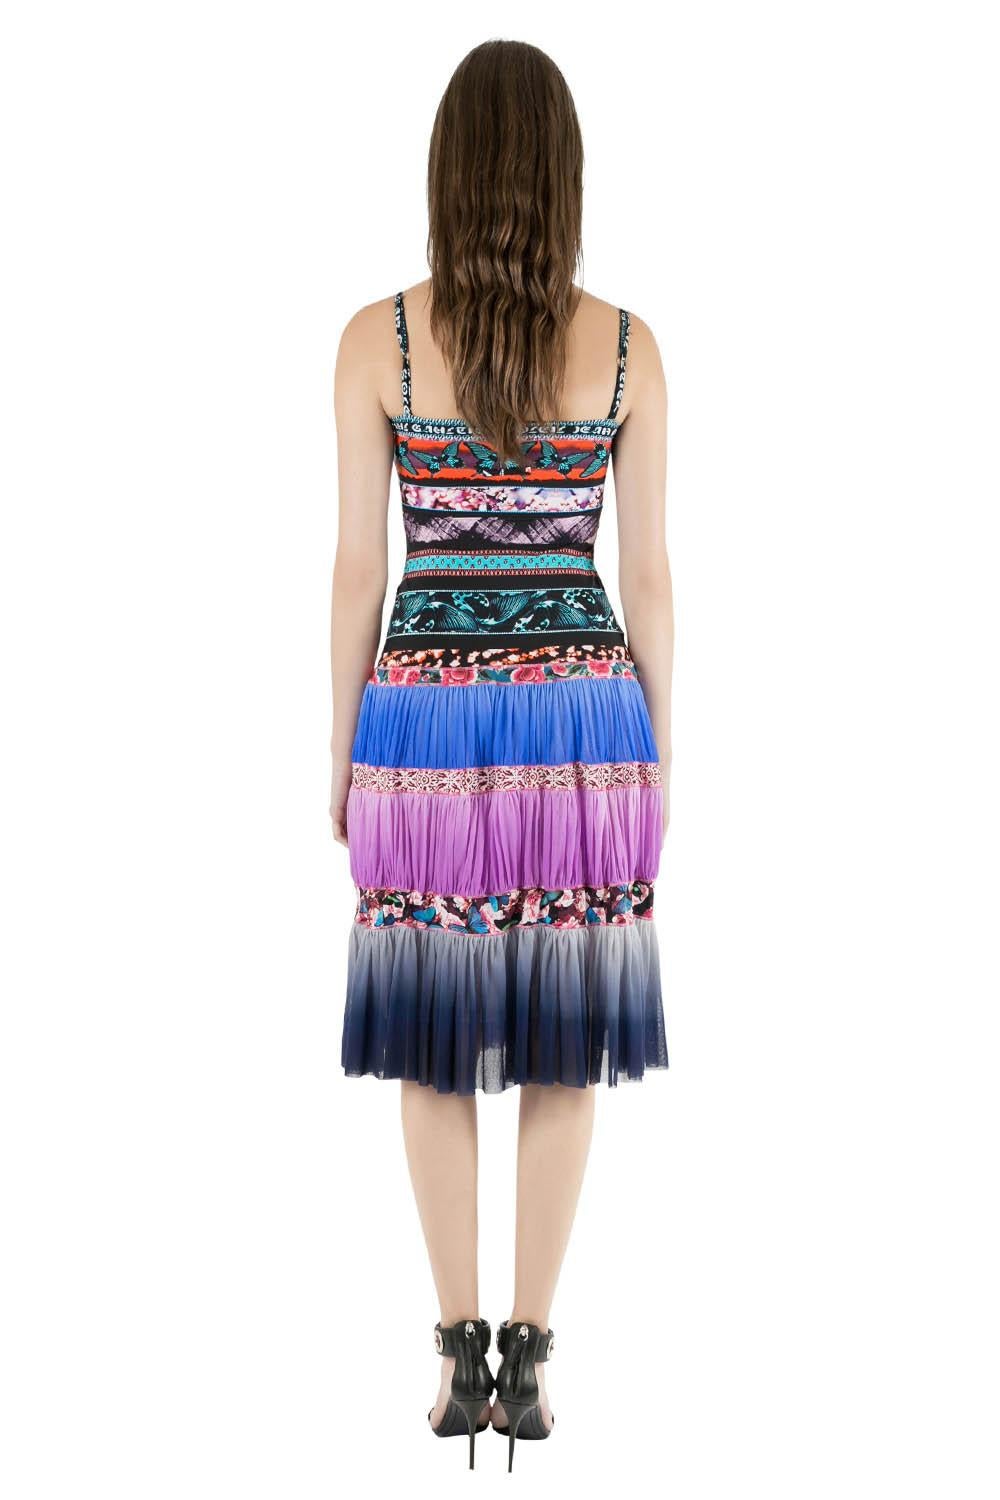 This cami dress by Jean Paul Gaultier will be your companion all summer. The multicolor dress has a digital print and is tailored from a fine fabric blend. It features a tiered design that creates a flowy bottom. Offering a great fit, it is also